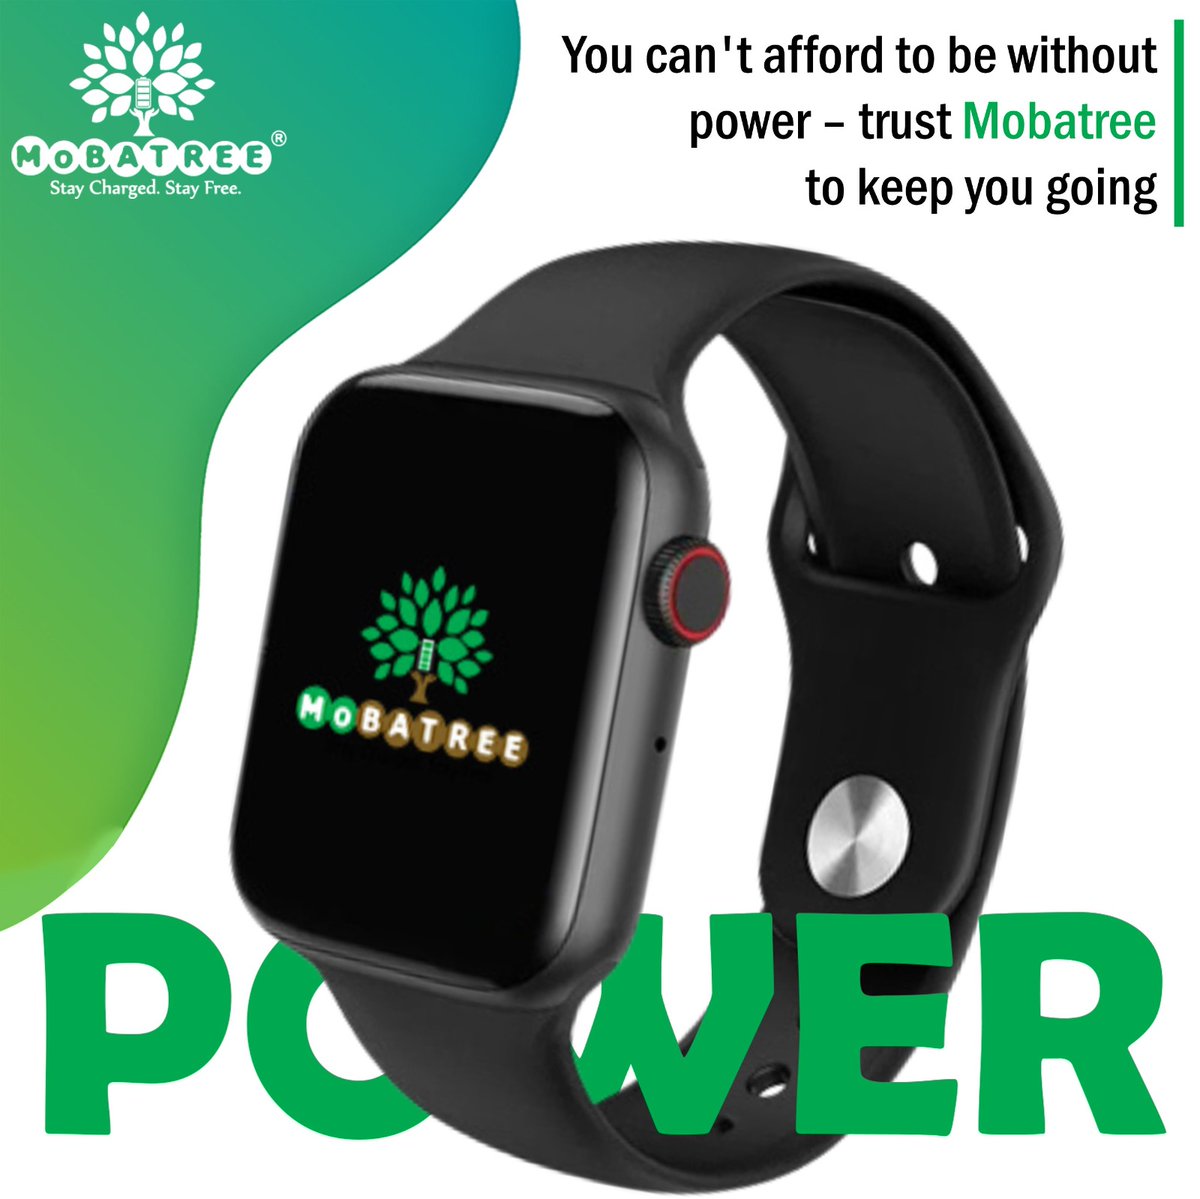 Trust Mobatree - All Compatible Mobile Batteries and Accessories smartwatch #watch #applewatch #samsung #smartwatches #smartphone #tech #fitness #technology #watchface #smartwatchu #gadgets #pro #smart #smartband